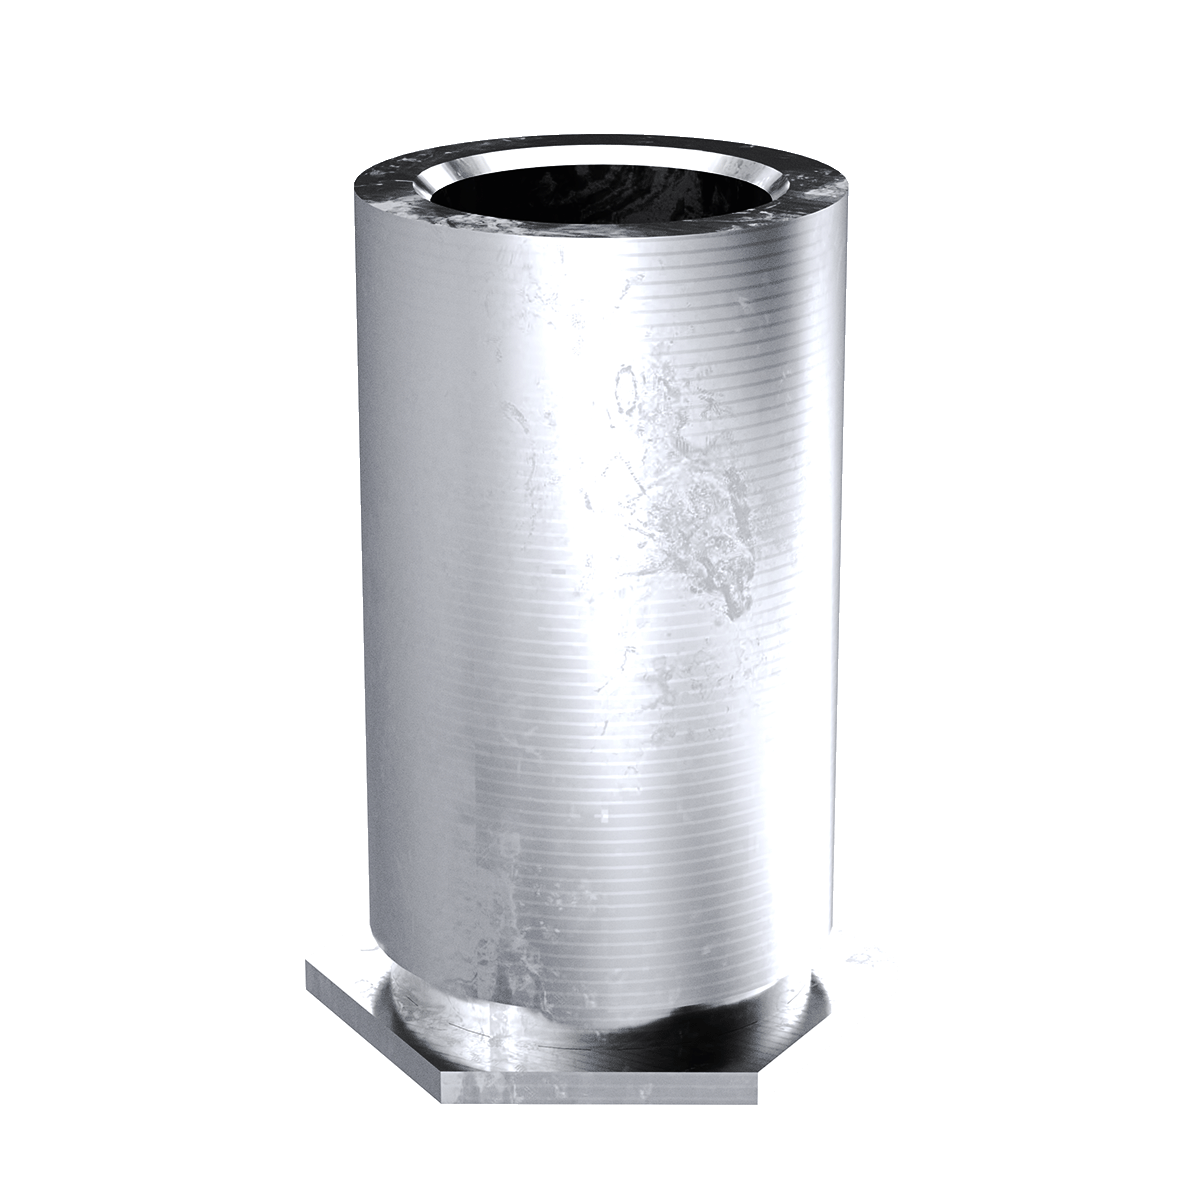 Self-Clinching Standoff, Through Unthreaded, 300 Series Stainless Steel, Passivated, 0.169 x 0.312, 100 Pack